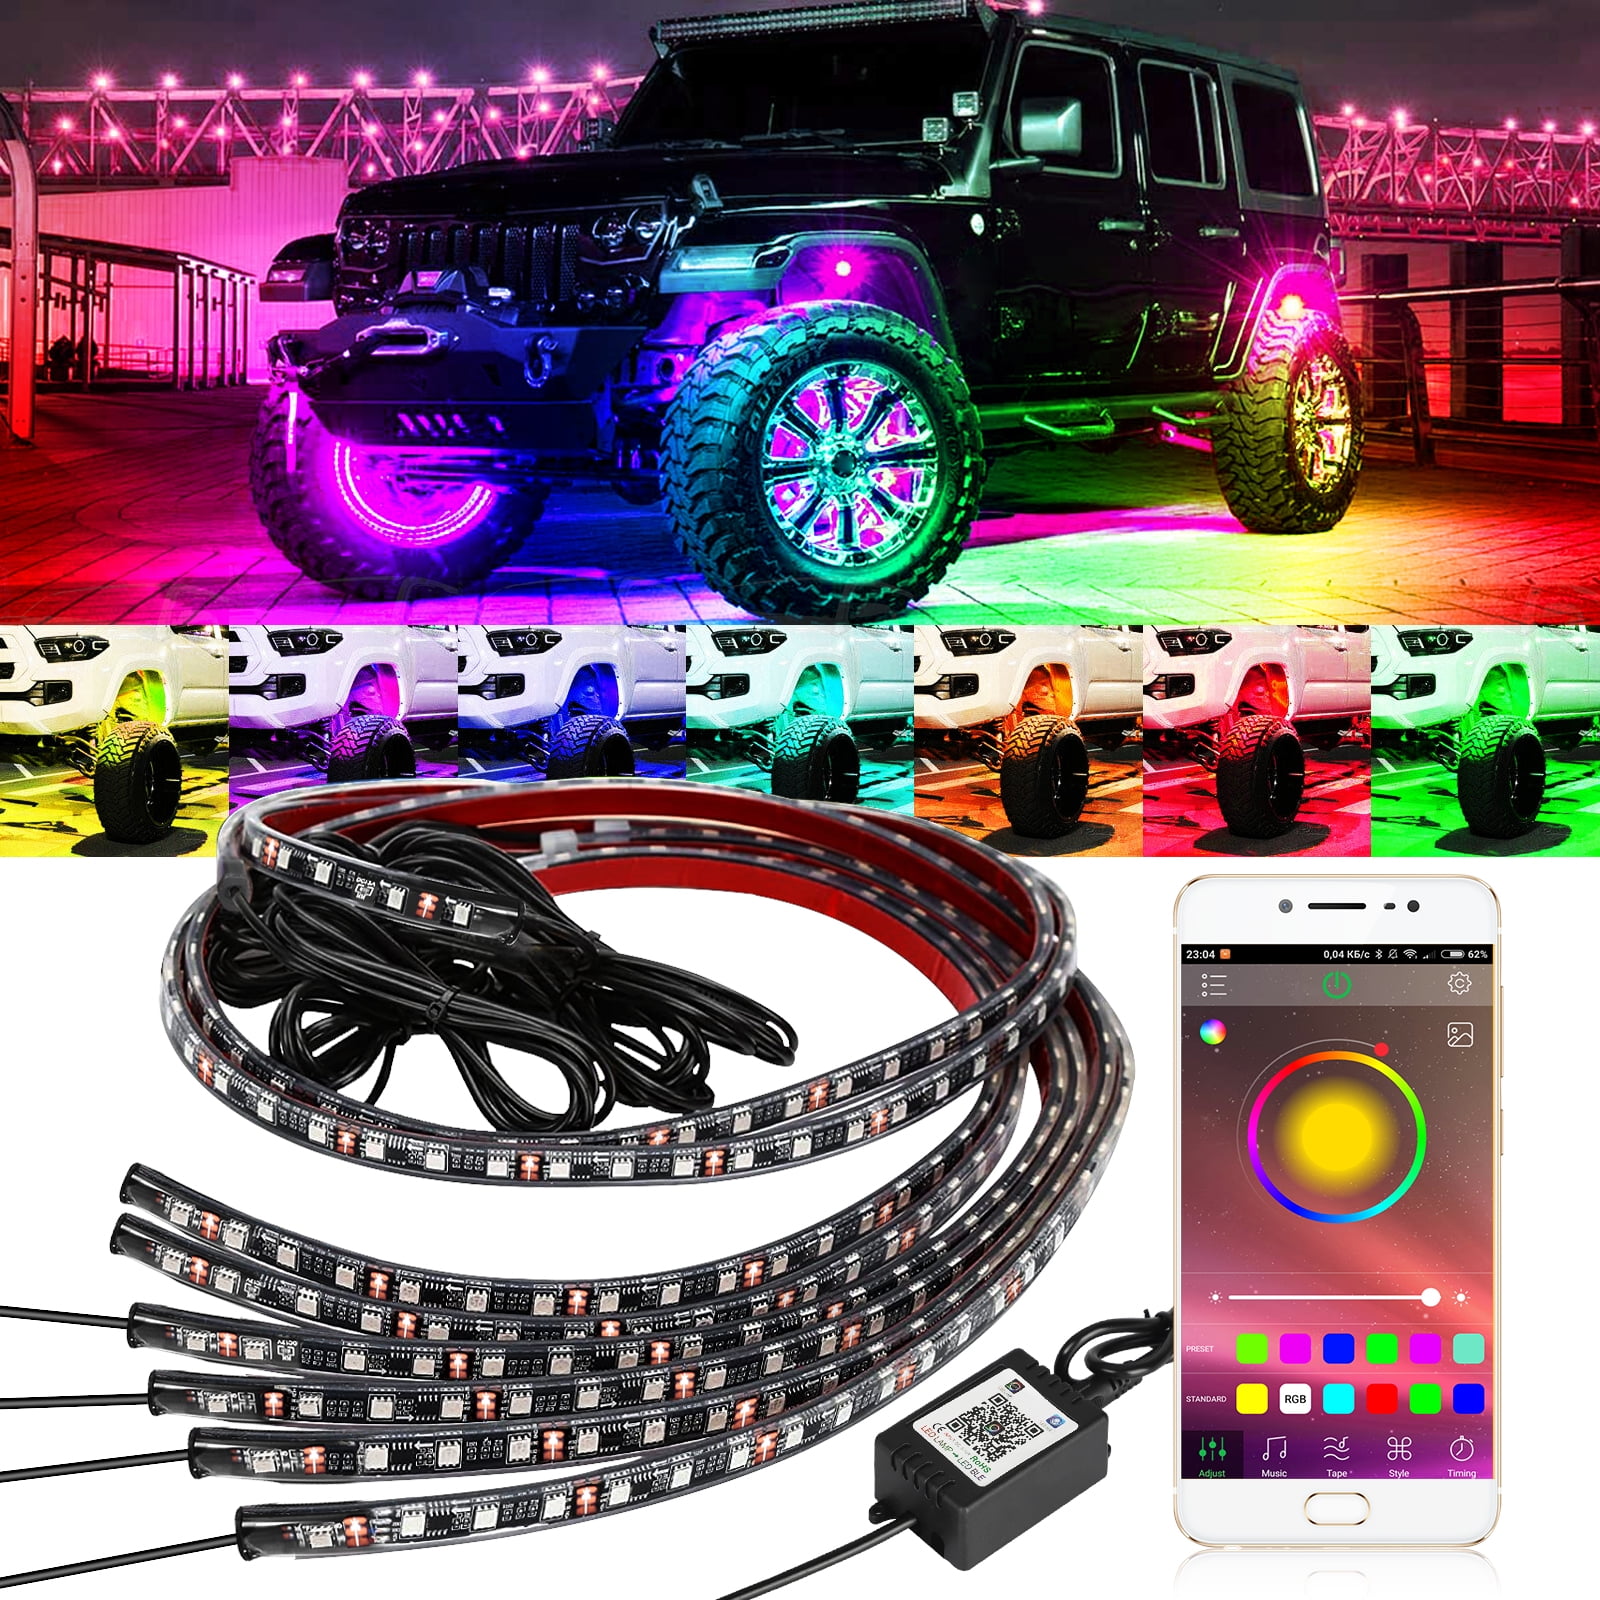 POWLAB Undercar Light,4Pcs Car LED Neon Glow Light Atmosphere Decorative Light Strip,Underbody System Waterproof Tube RGB 8 Color Sound Active Function with Wireless Remote Control 